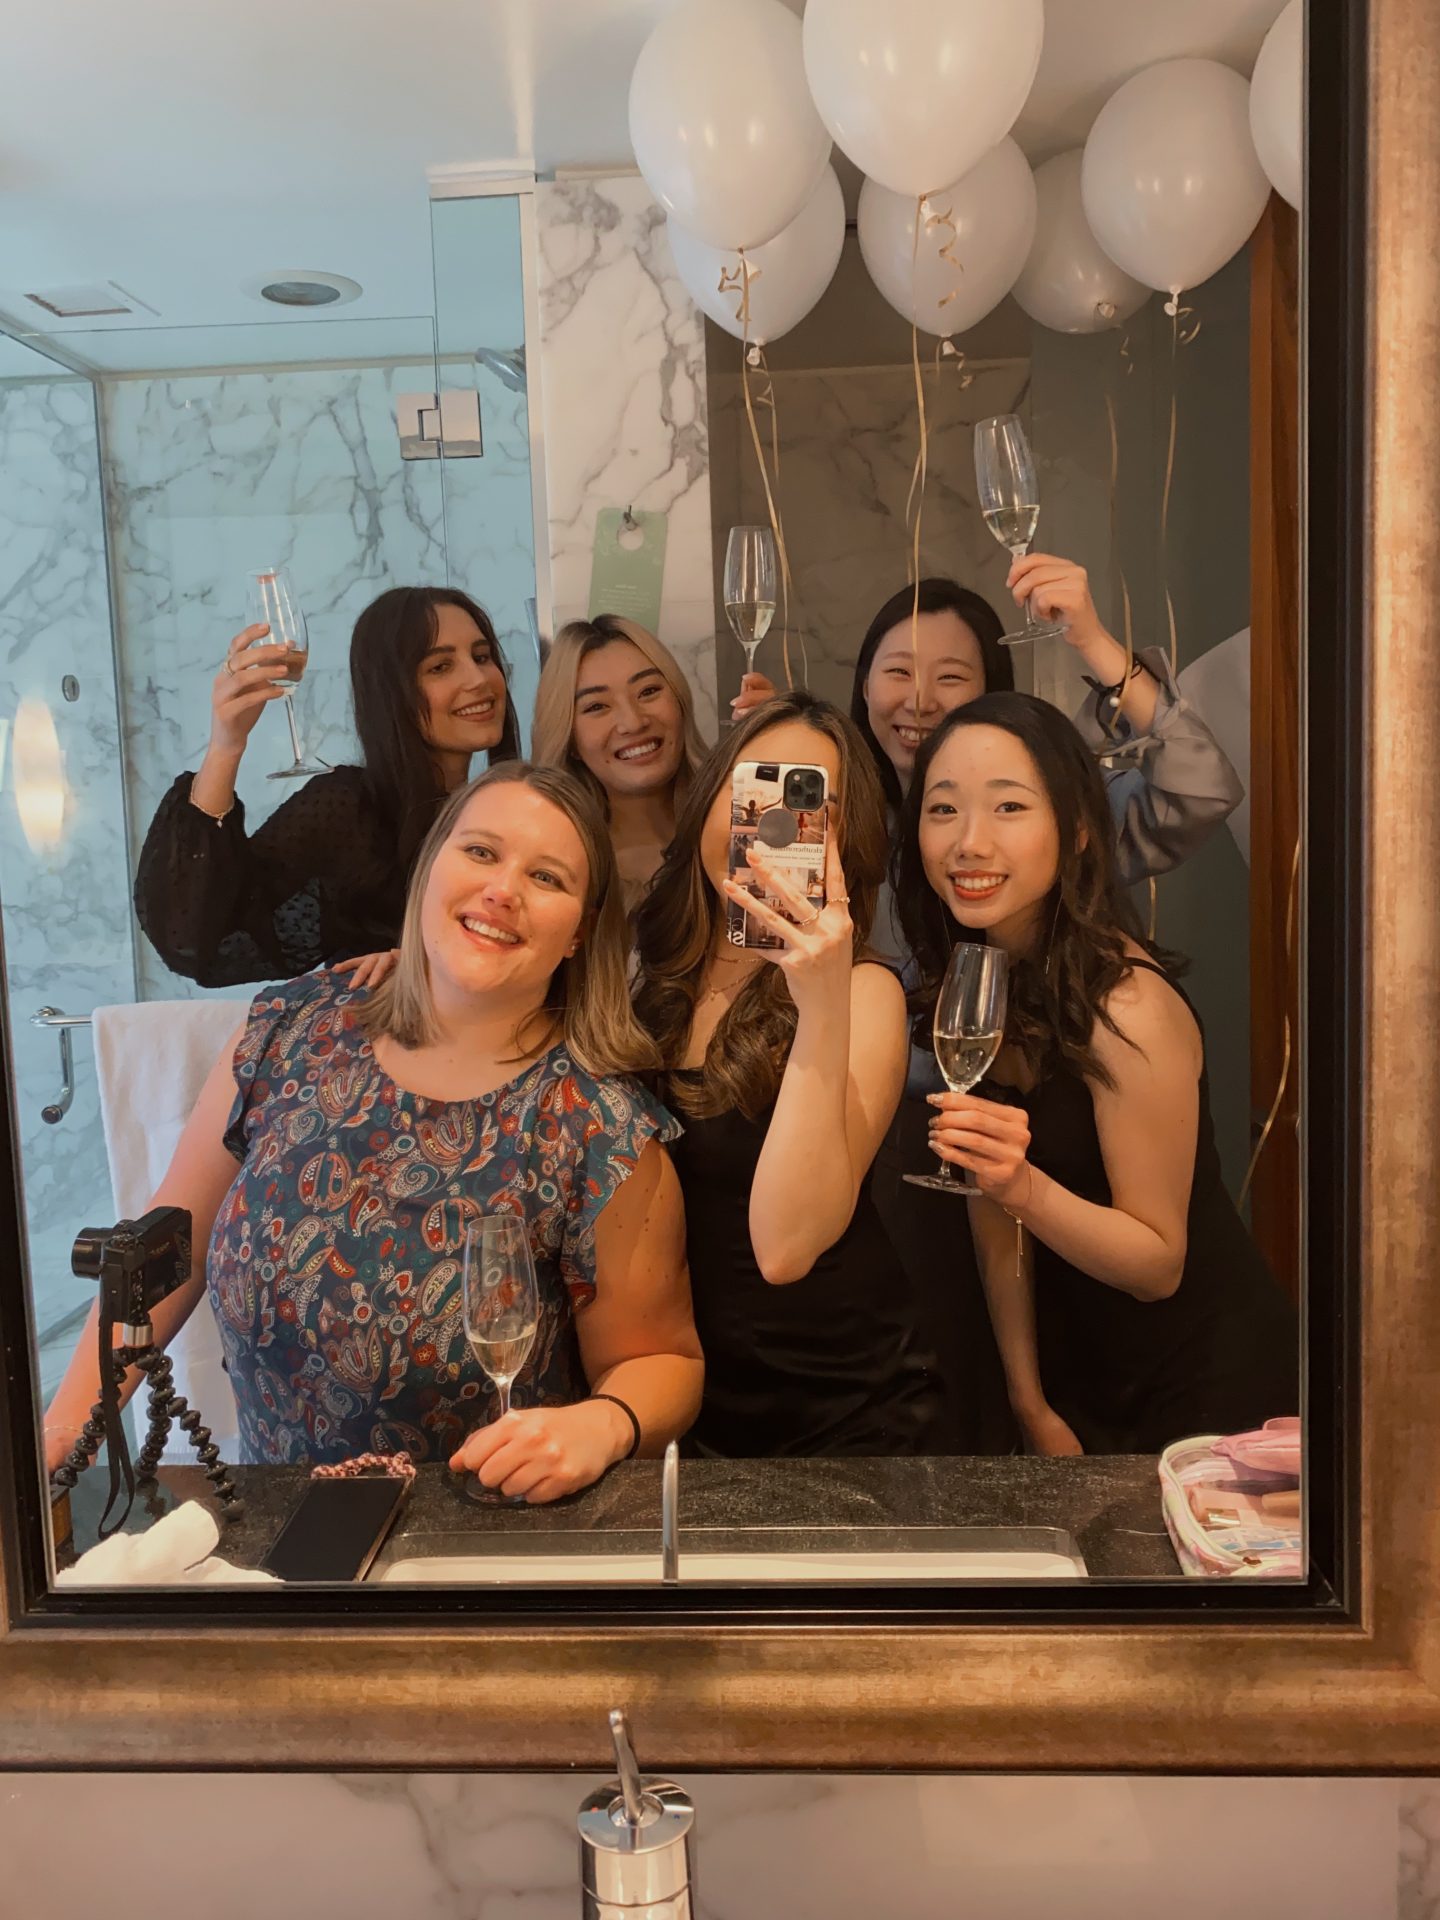 6 ladies posing in a mirror holding glasses with balloons in the background